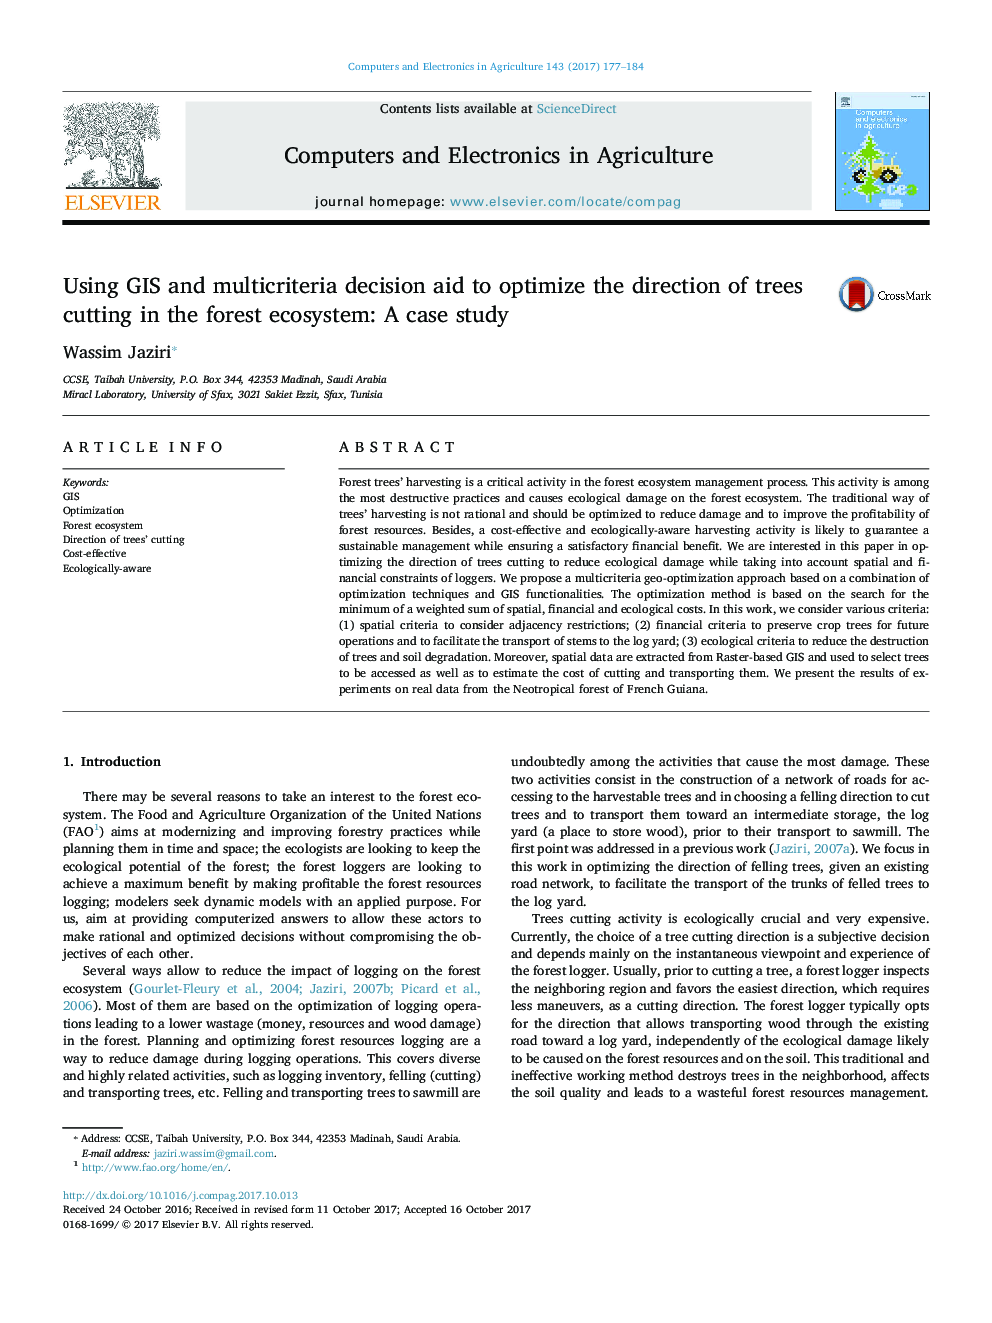 Using GIS and multicriteria decision aid to optimize the direction of trees cutting in the forest ecosystem: A case study